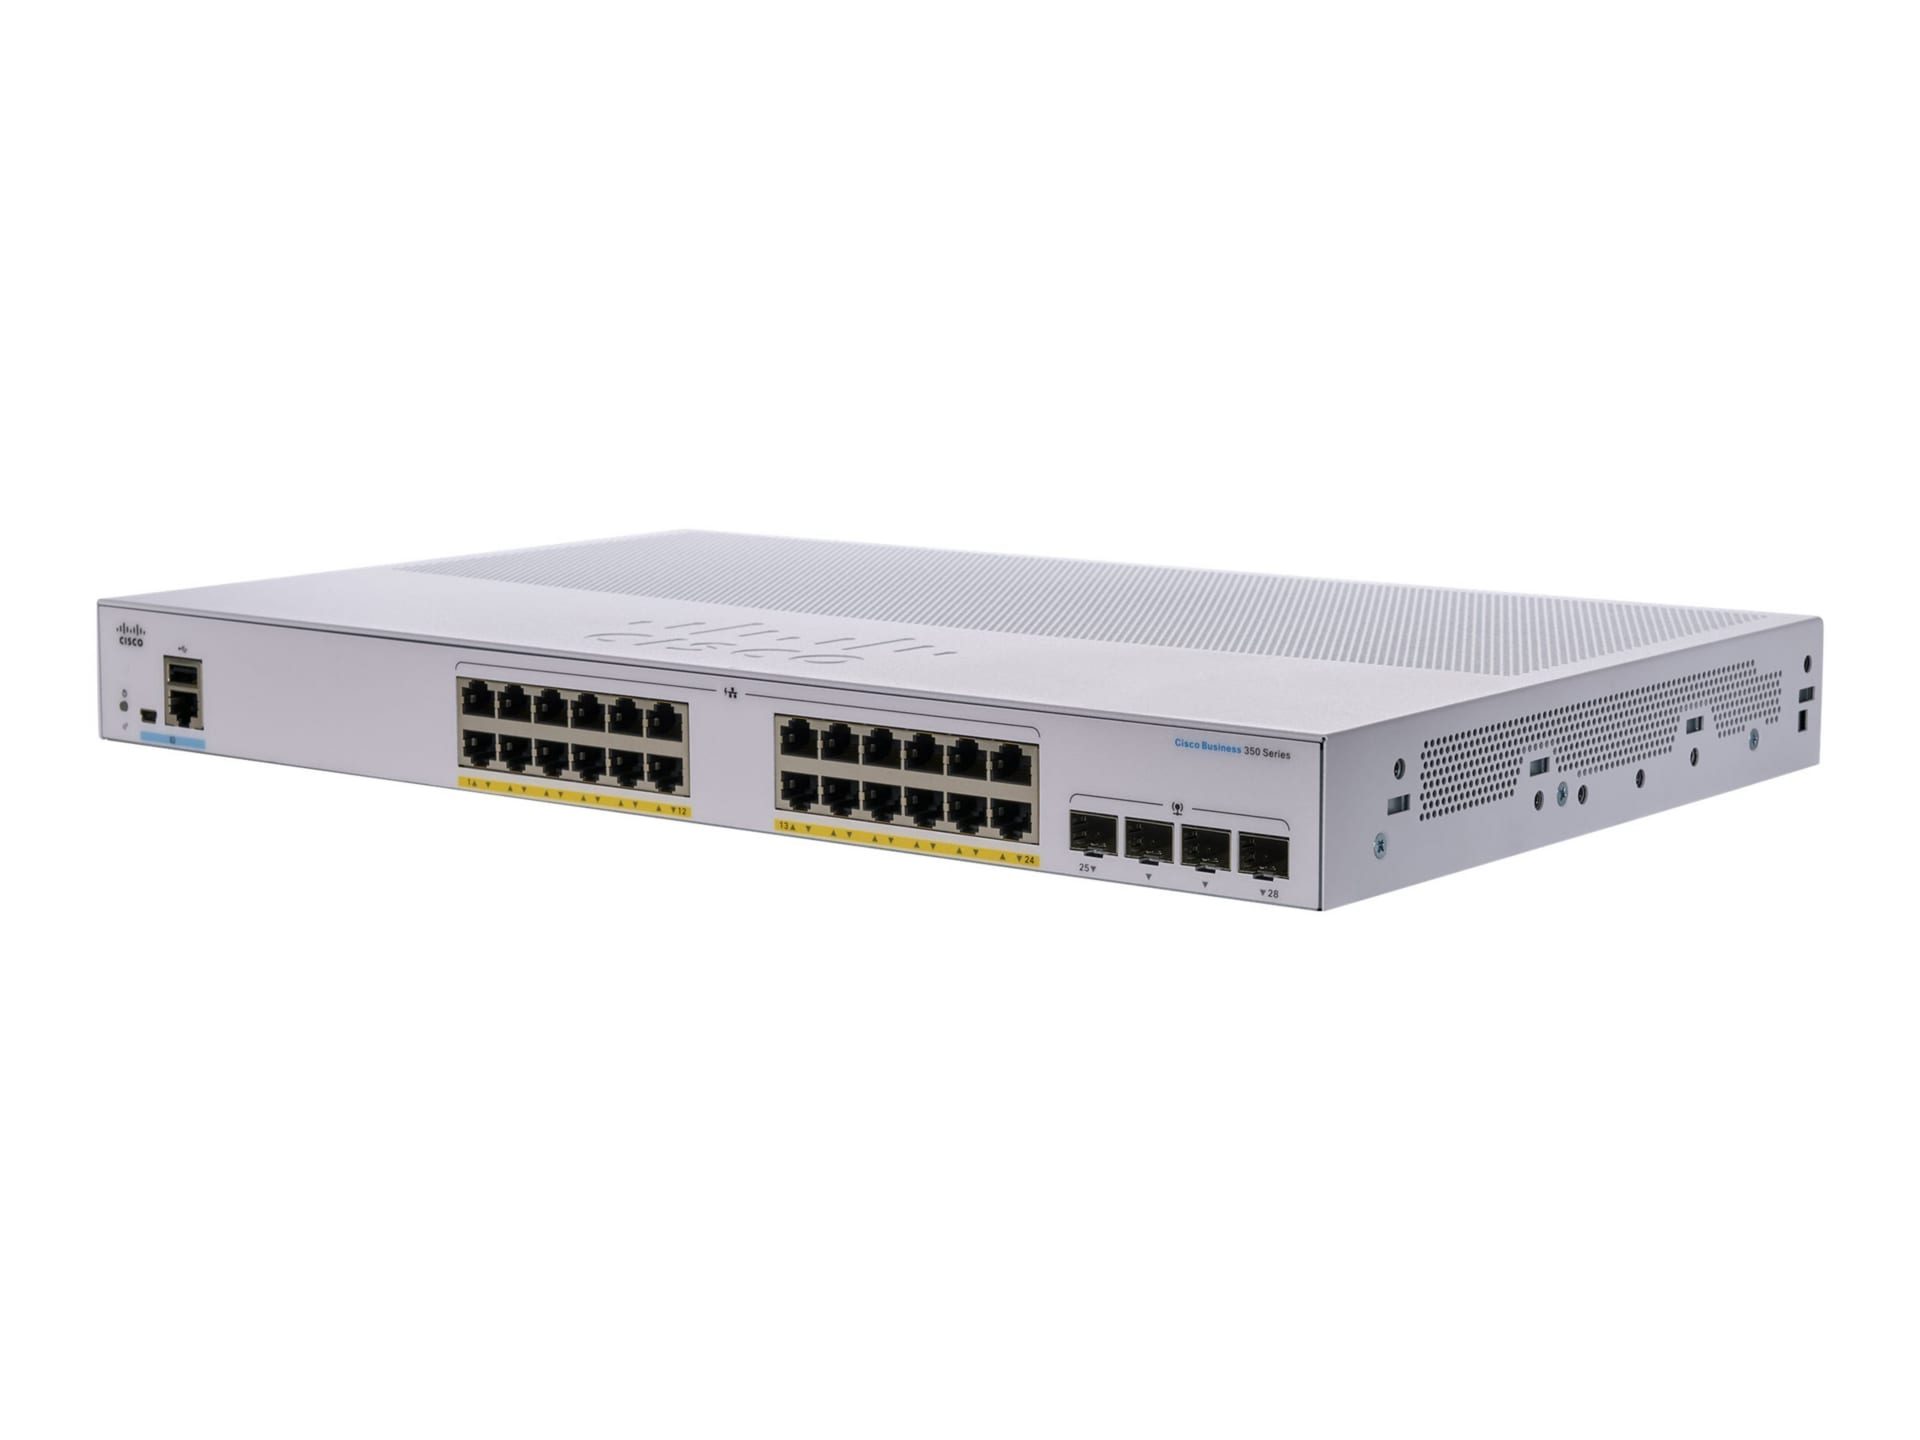 Cisco Business 350 Series 350-24P-4X - switch - 24 ports - managed - rack-mountable